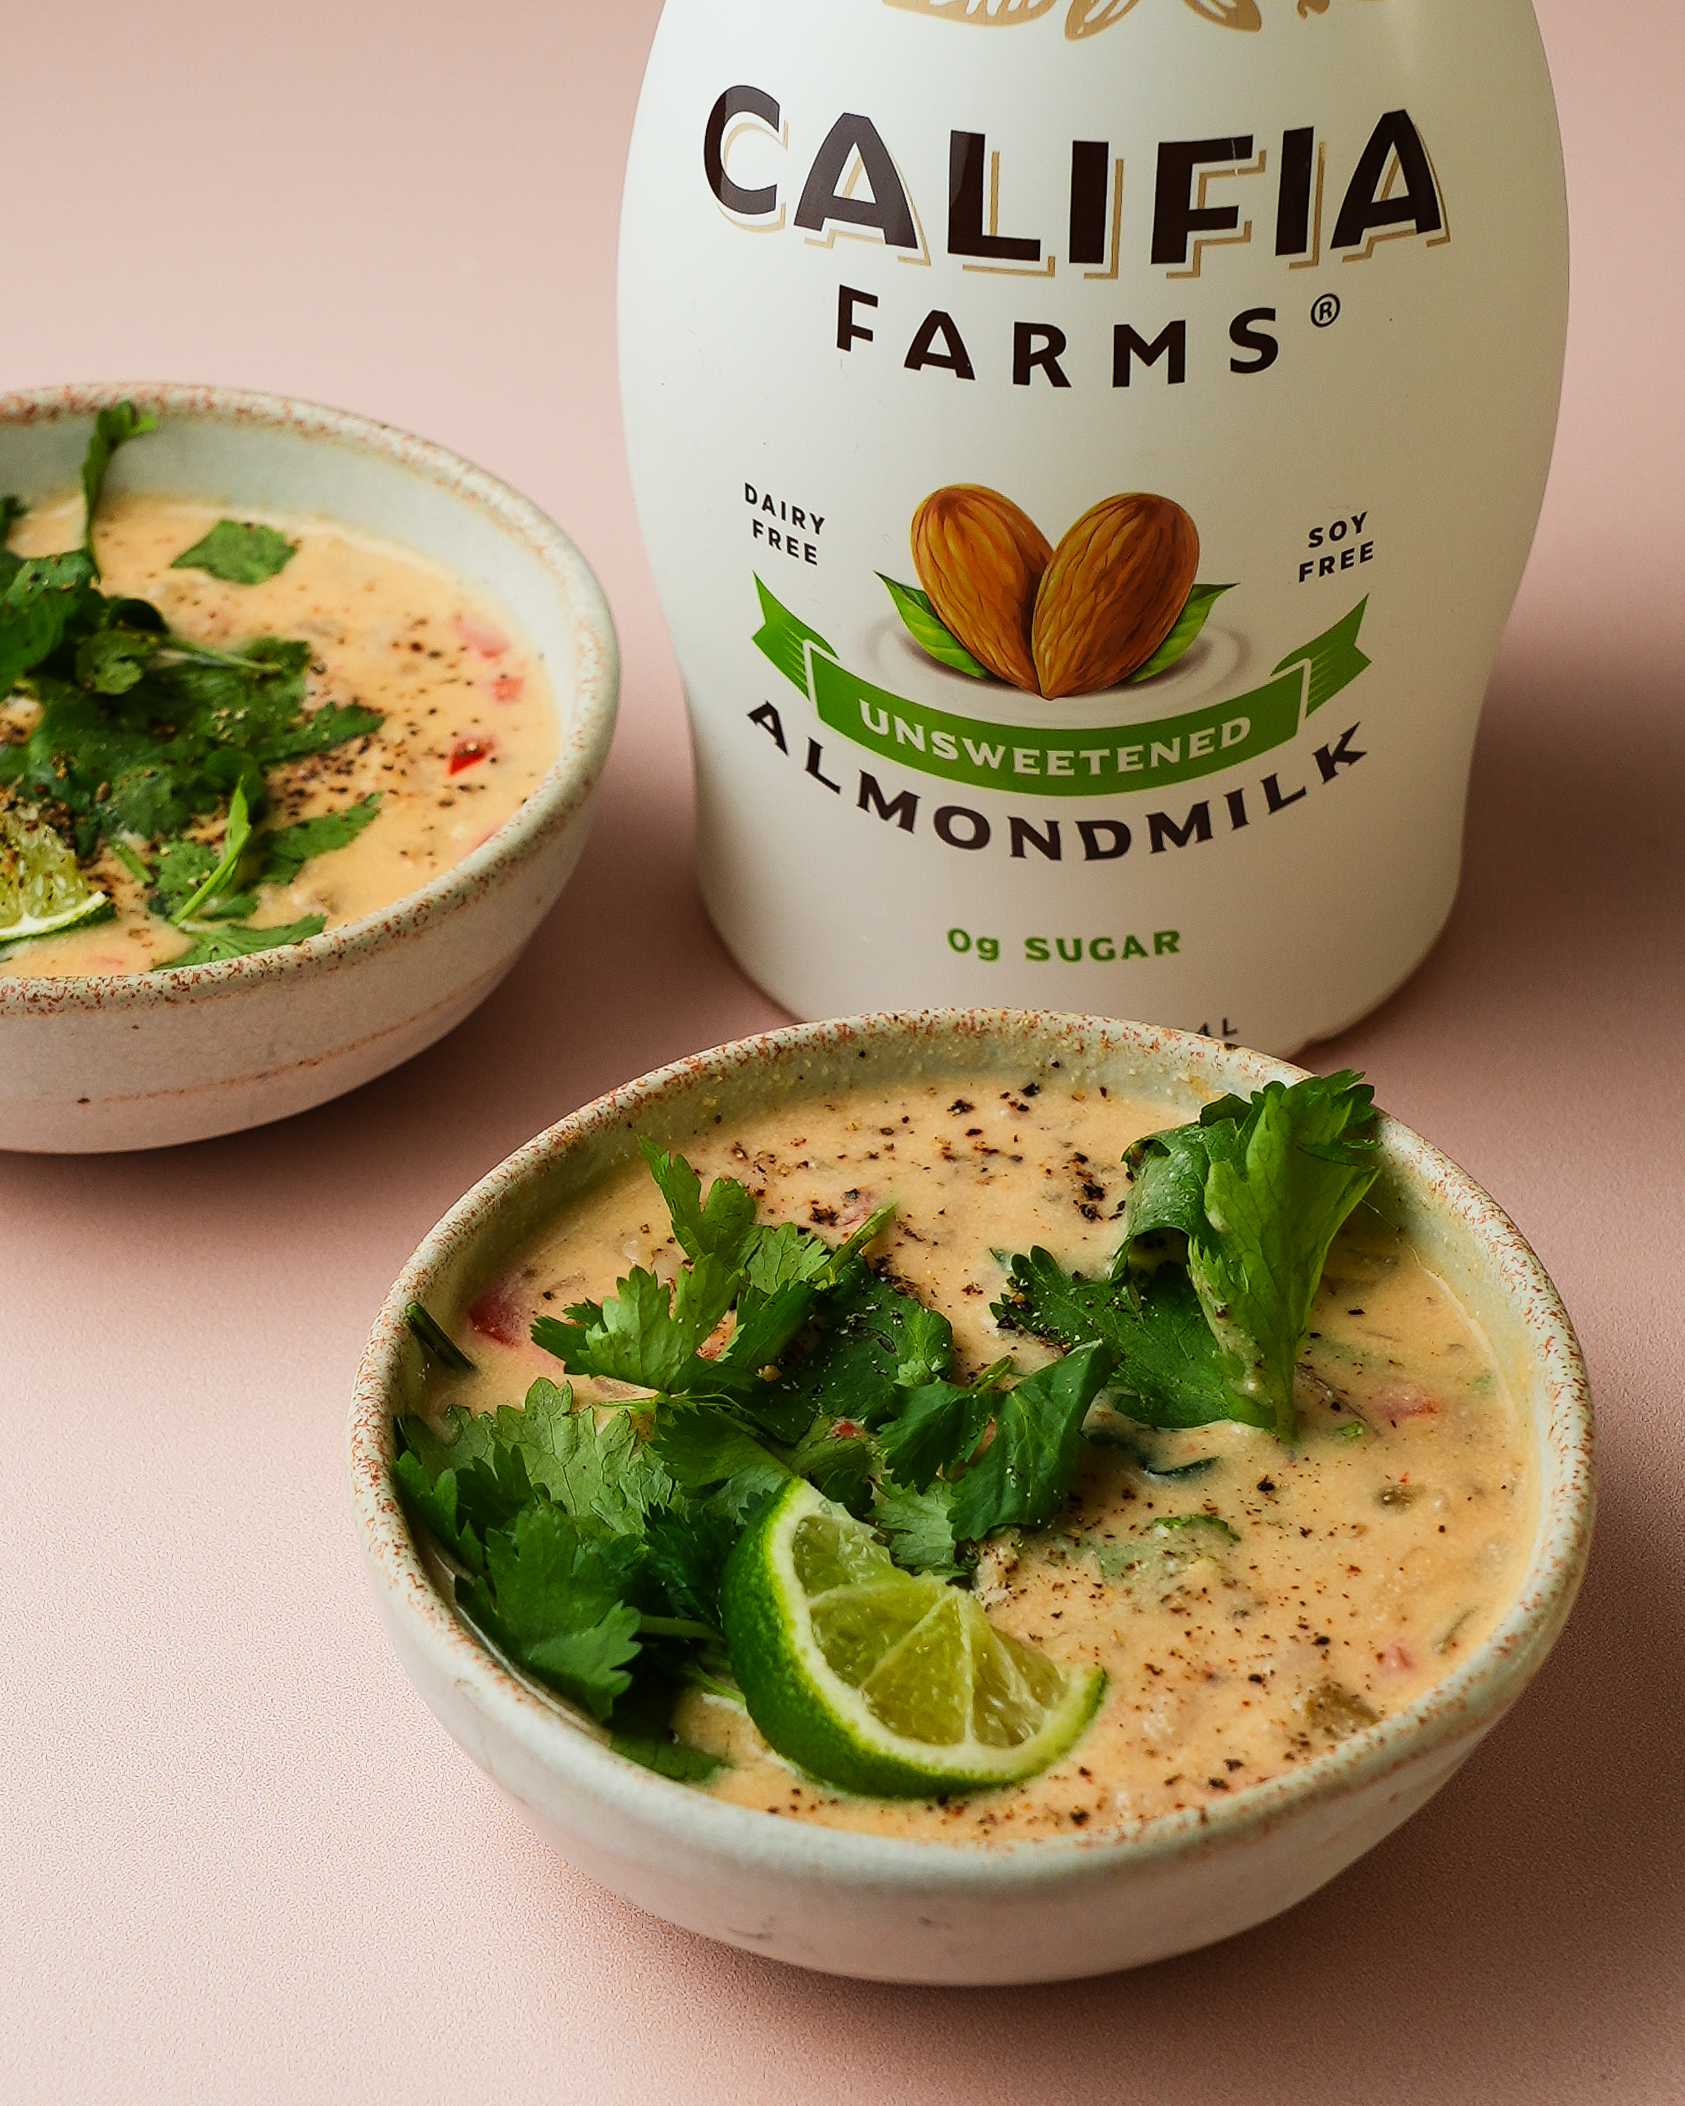 A bowl of chili sits at the forefront of the image, with Califia Farms Unsweetened Almondmilk in the background